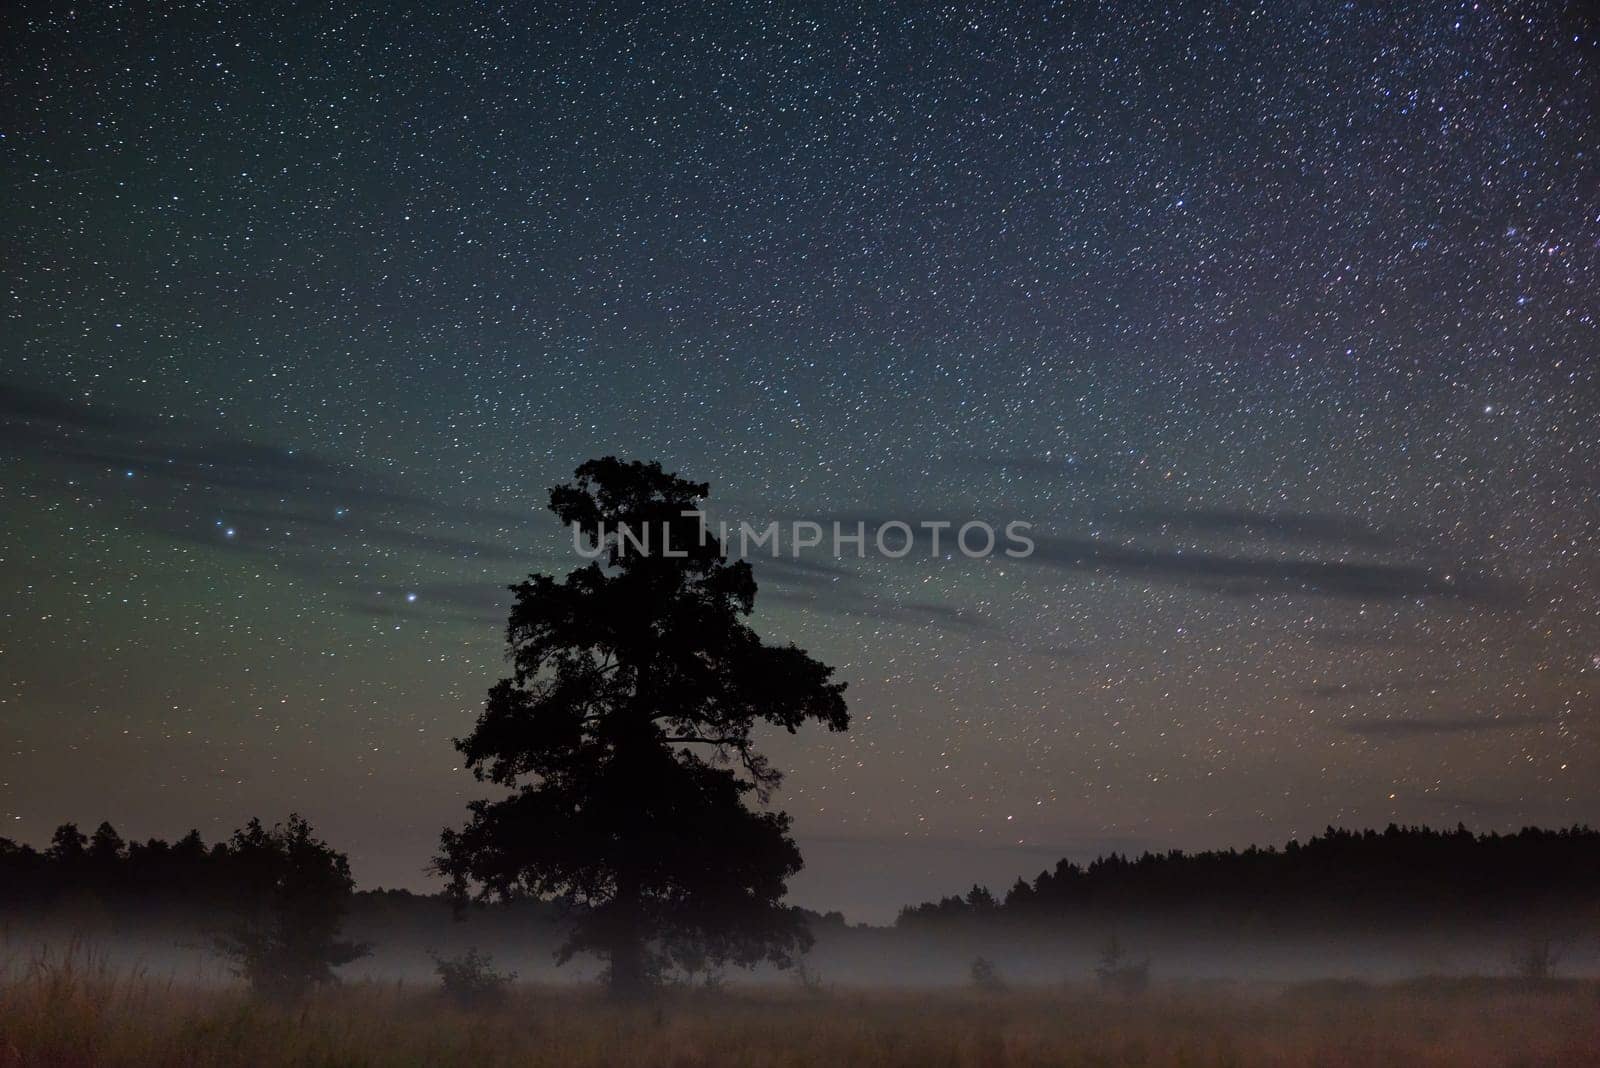 Night landscape of lonely tree in misty valley, bright star sky with some small clouds above by VitaliiPetrushenko